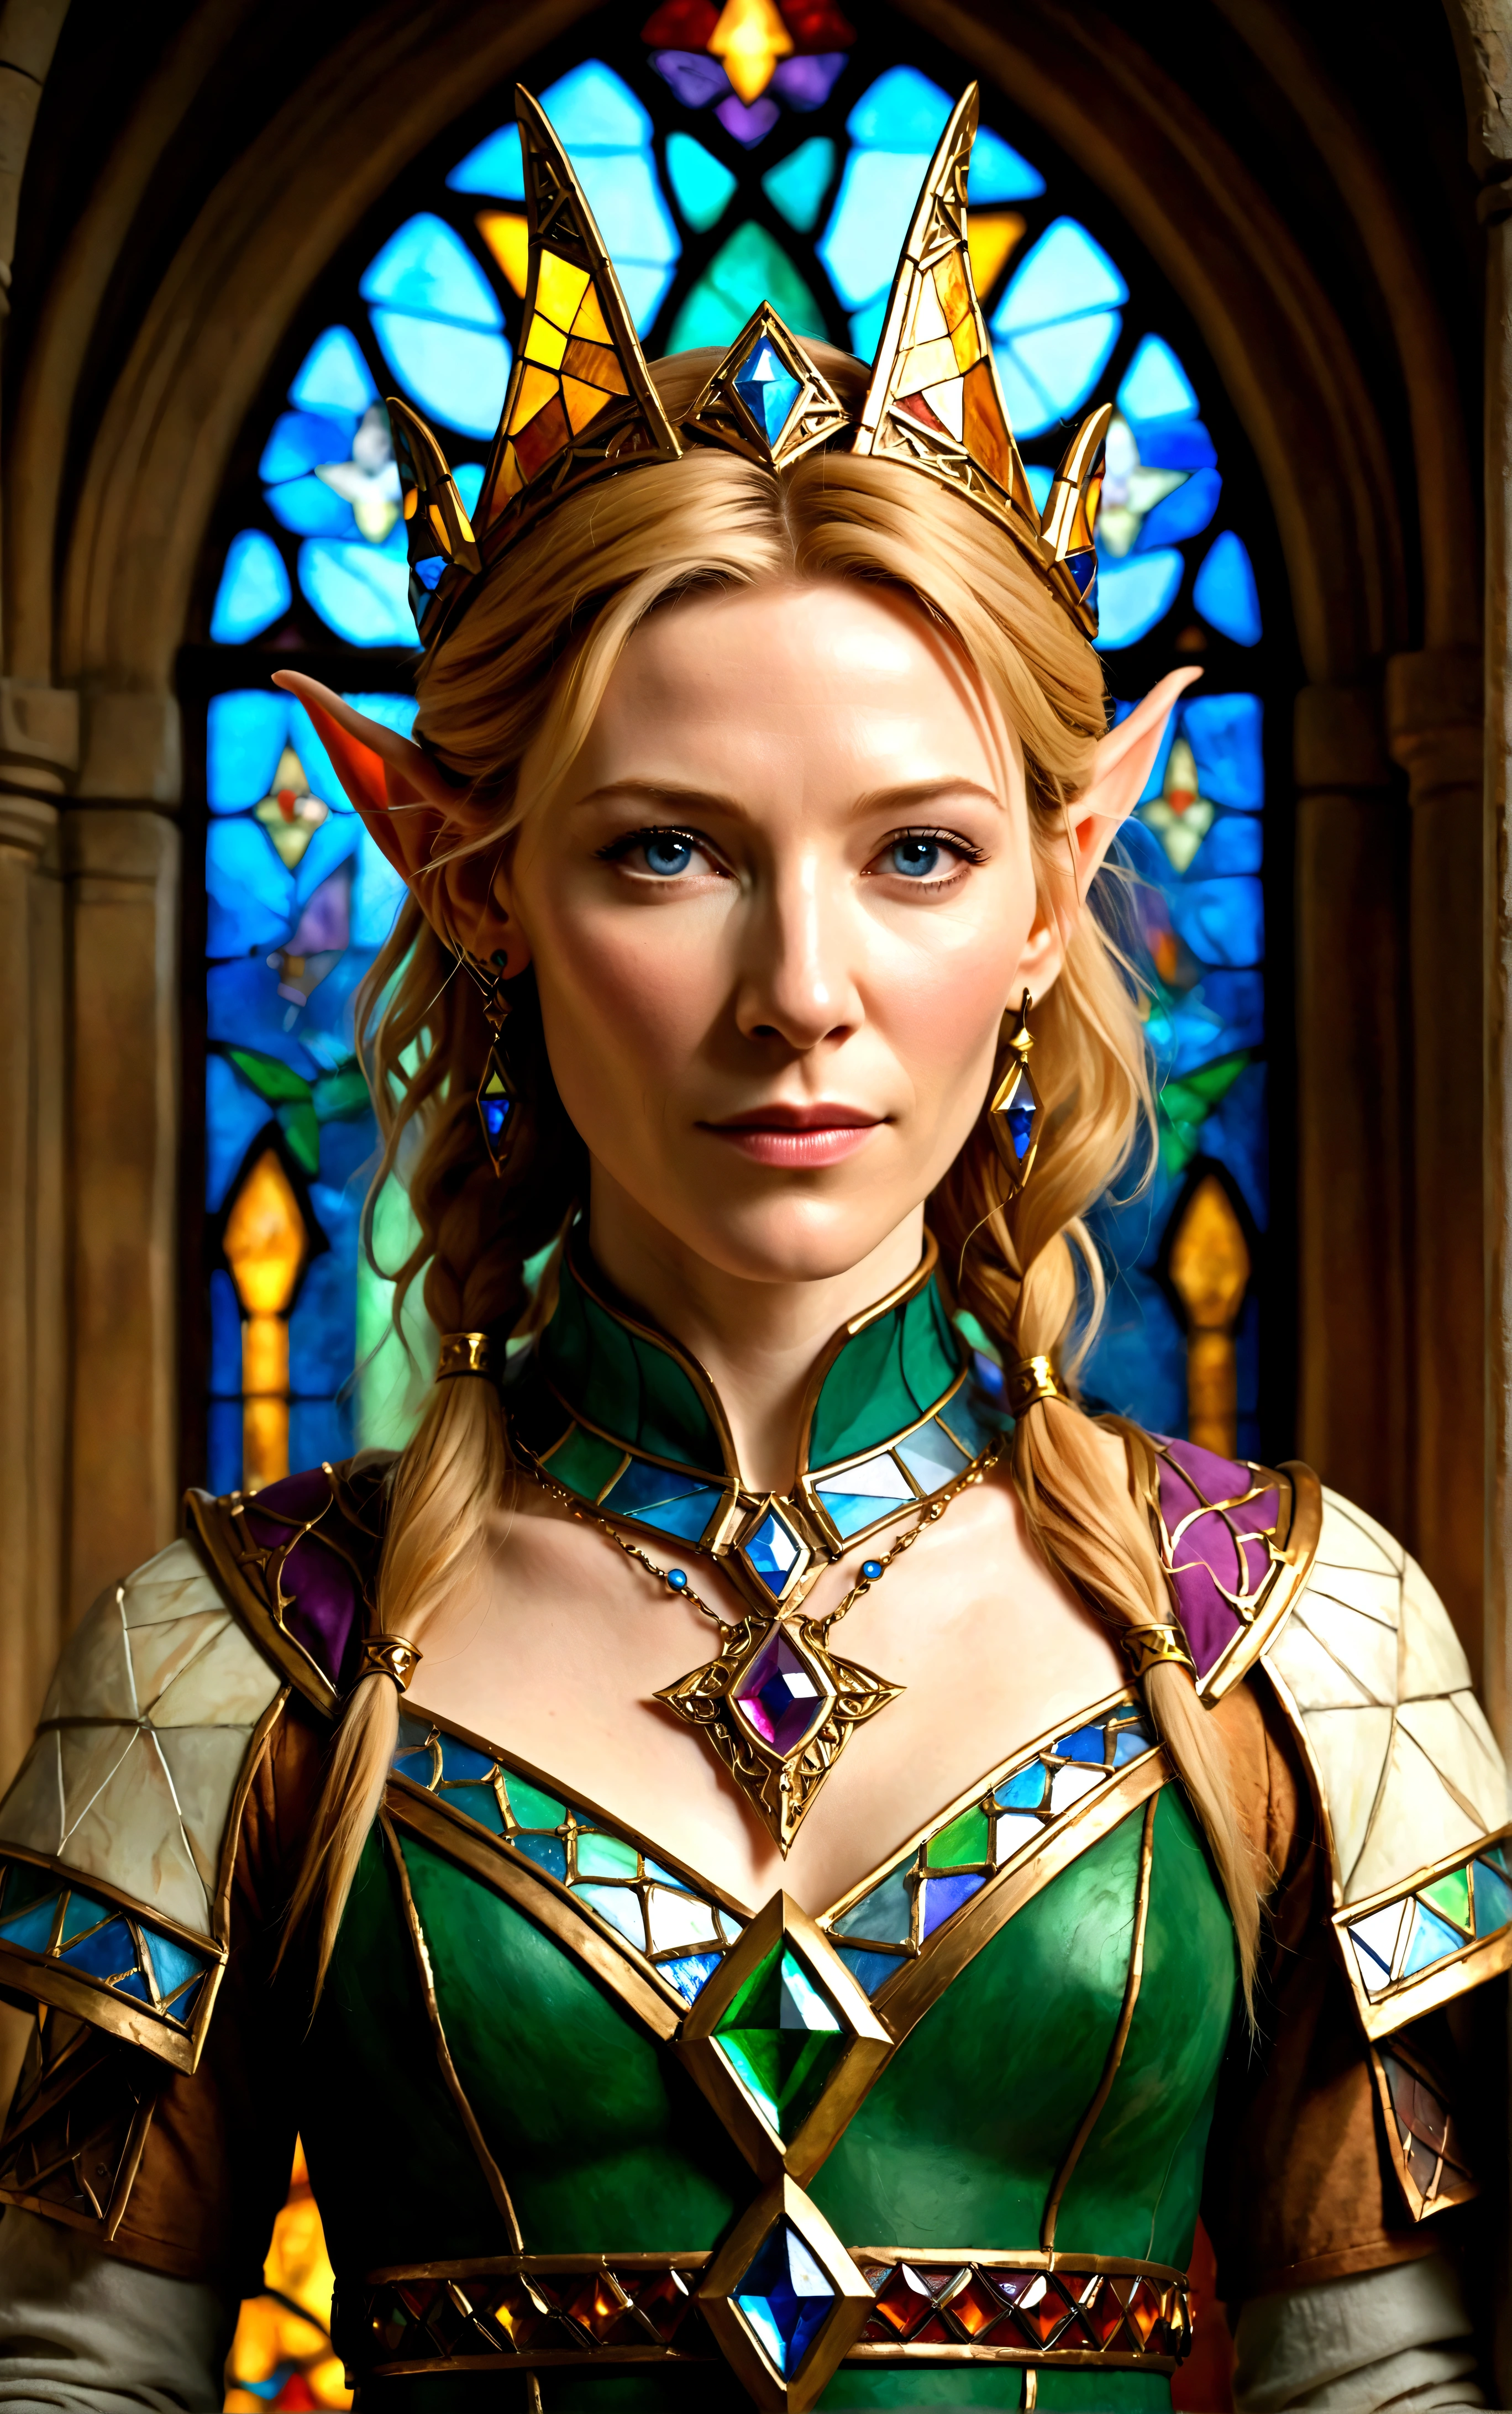 high quality portrait of Cate Blanchett, 25 years old, elf ears, wearing Twilight princess Zelda costume, heroic pose, lavish room with stained glass, extremely detailed face and eyes, intricate costume details, dramatic lighting, photorealistic, vibrant colors, cinematic, fantasy, award-winning digital art